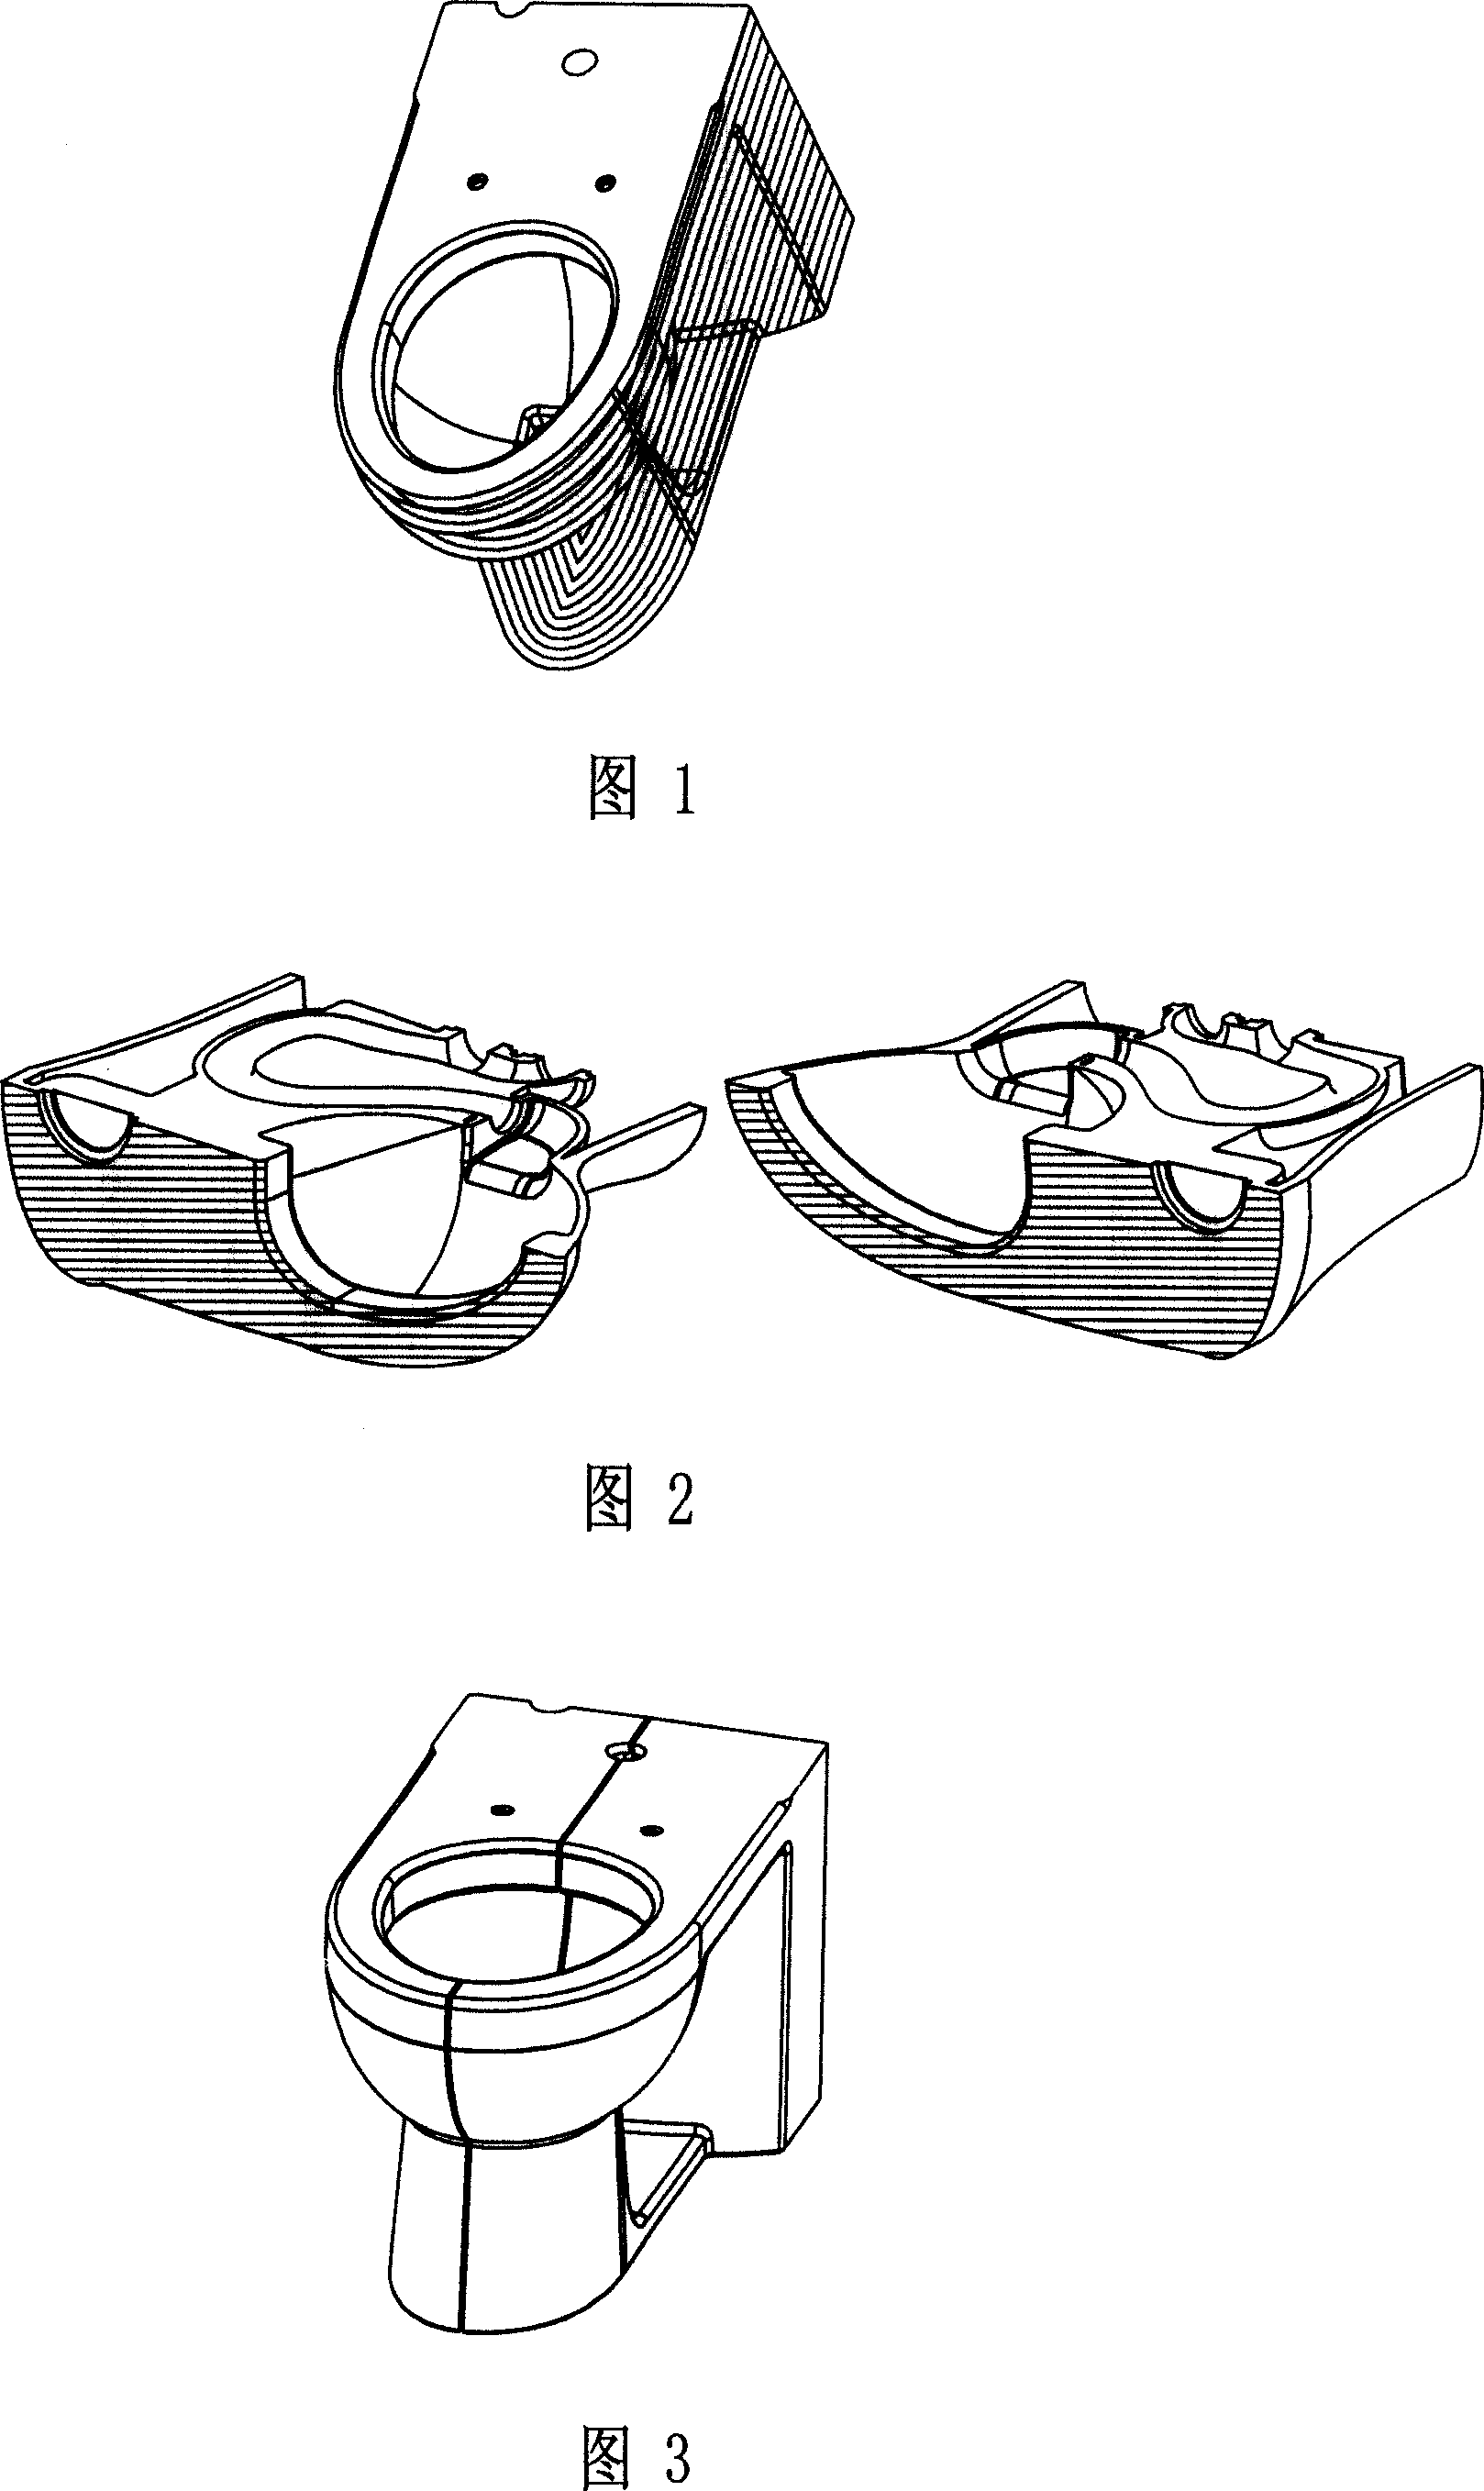 Method for manufacturing ceramic cleaning tool model and ceramic cleaning tool model manufactured therefrom